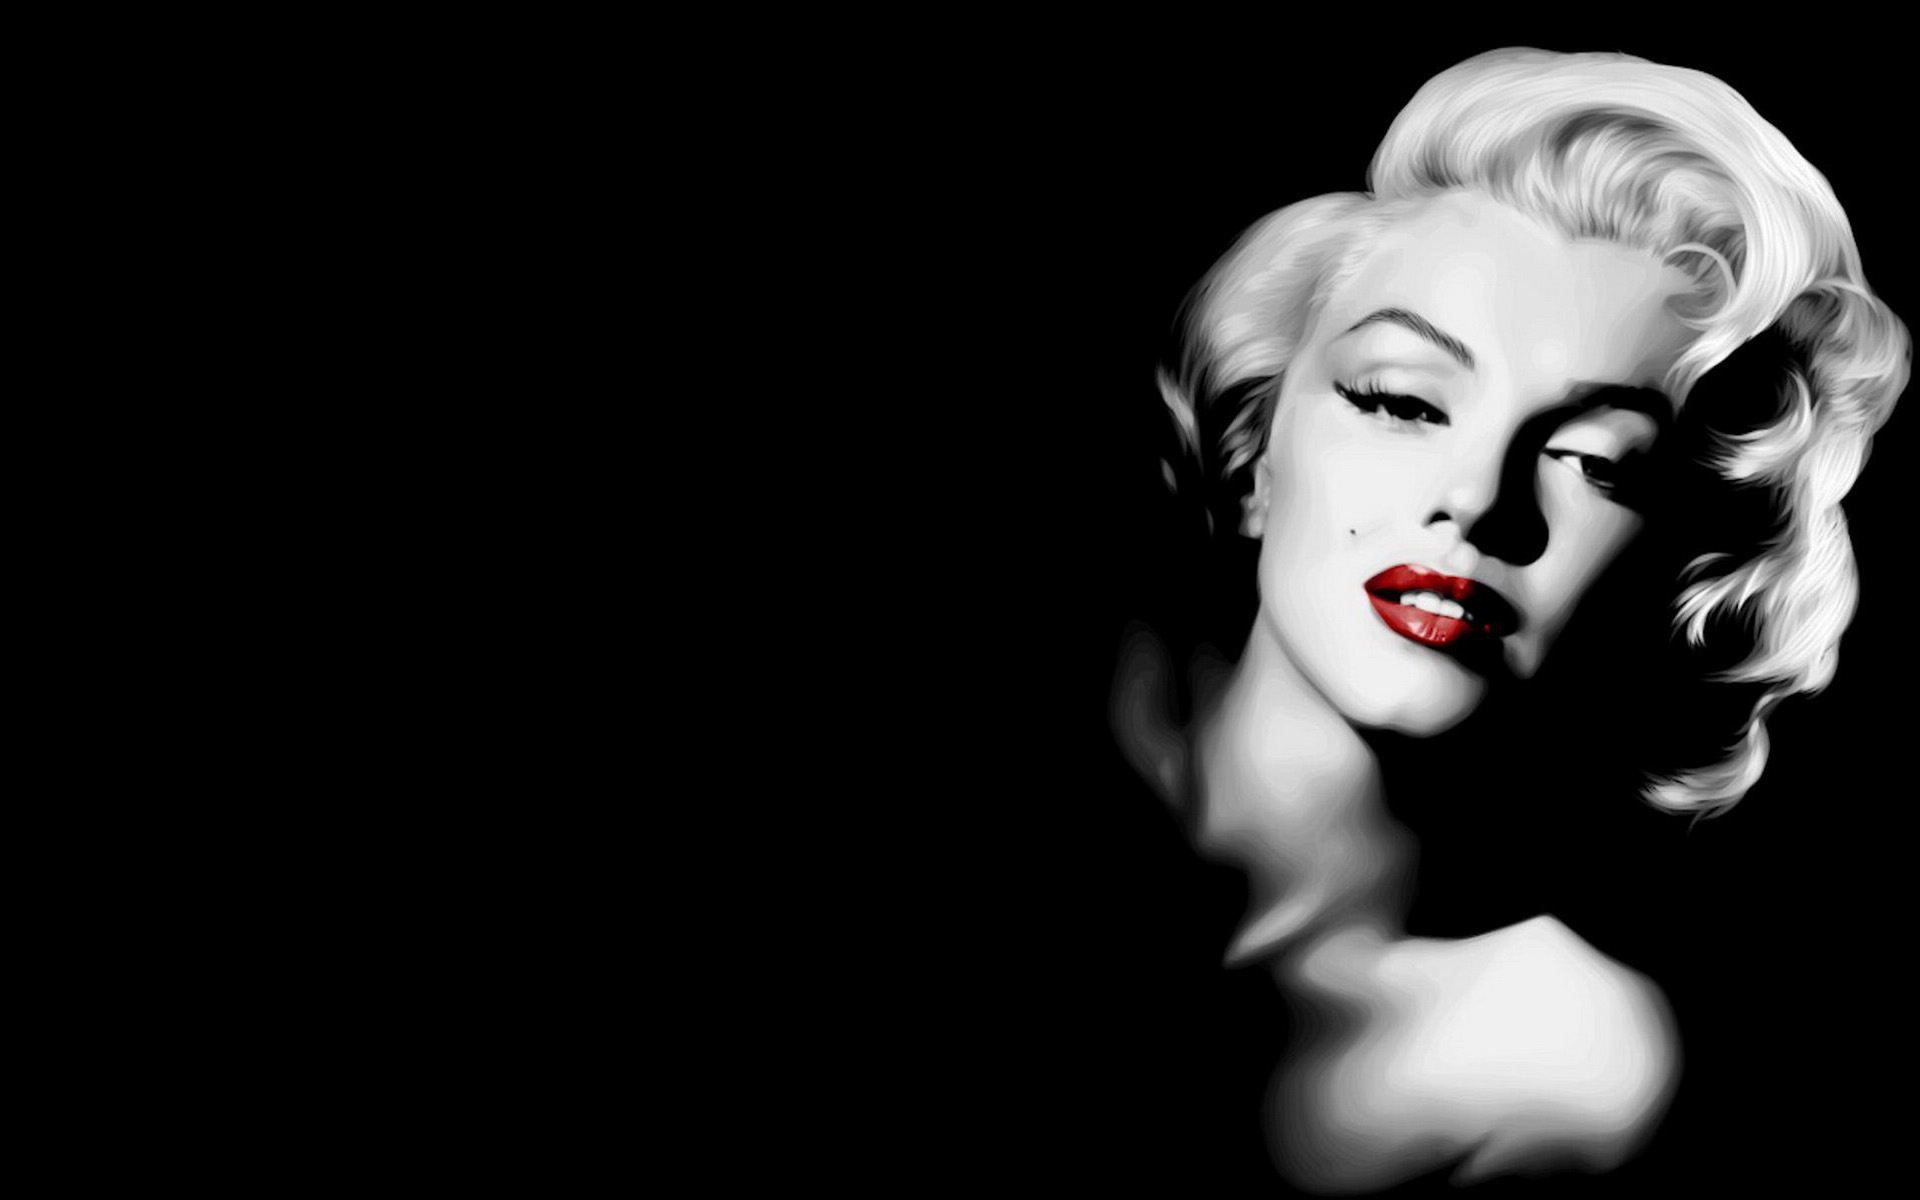 Marilyn Monroe Wallpapers High Resolution and Quality Download